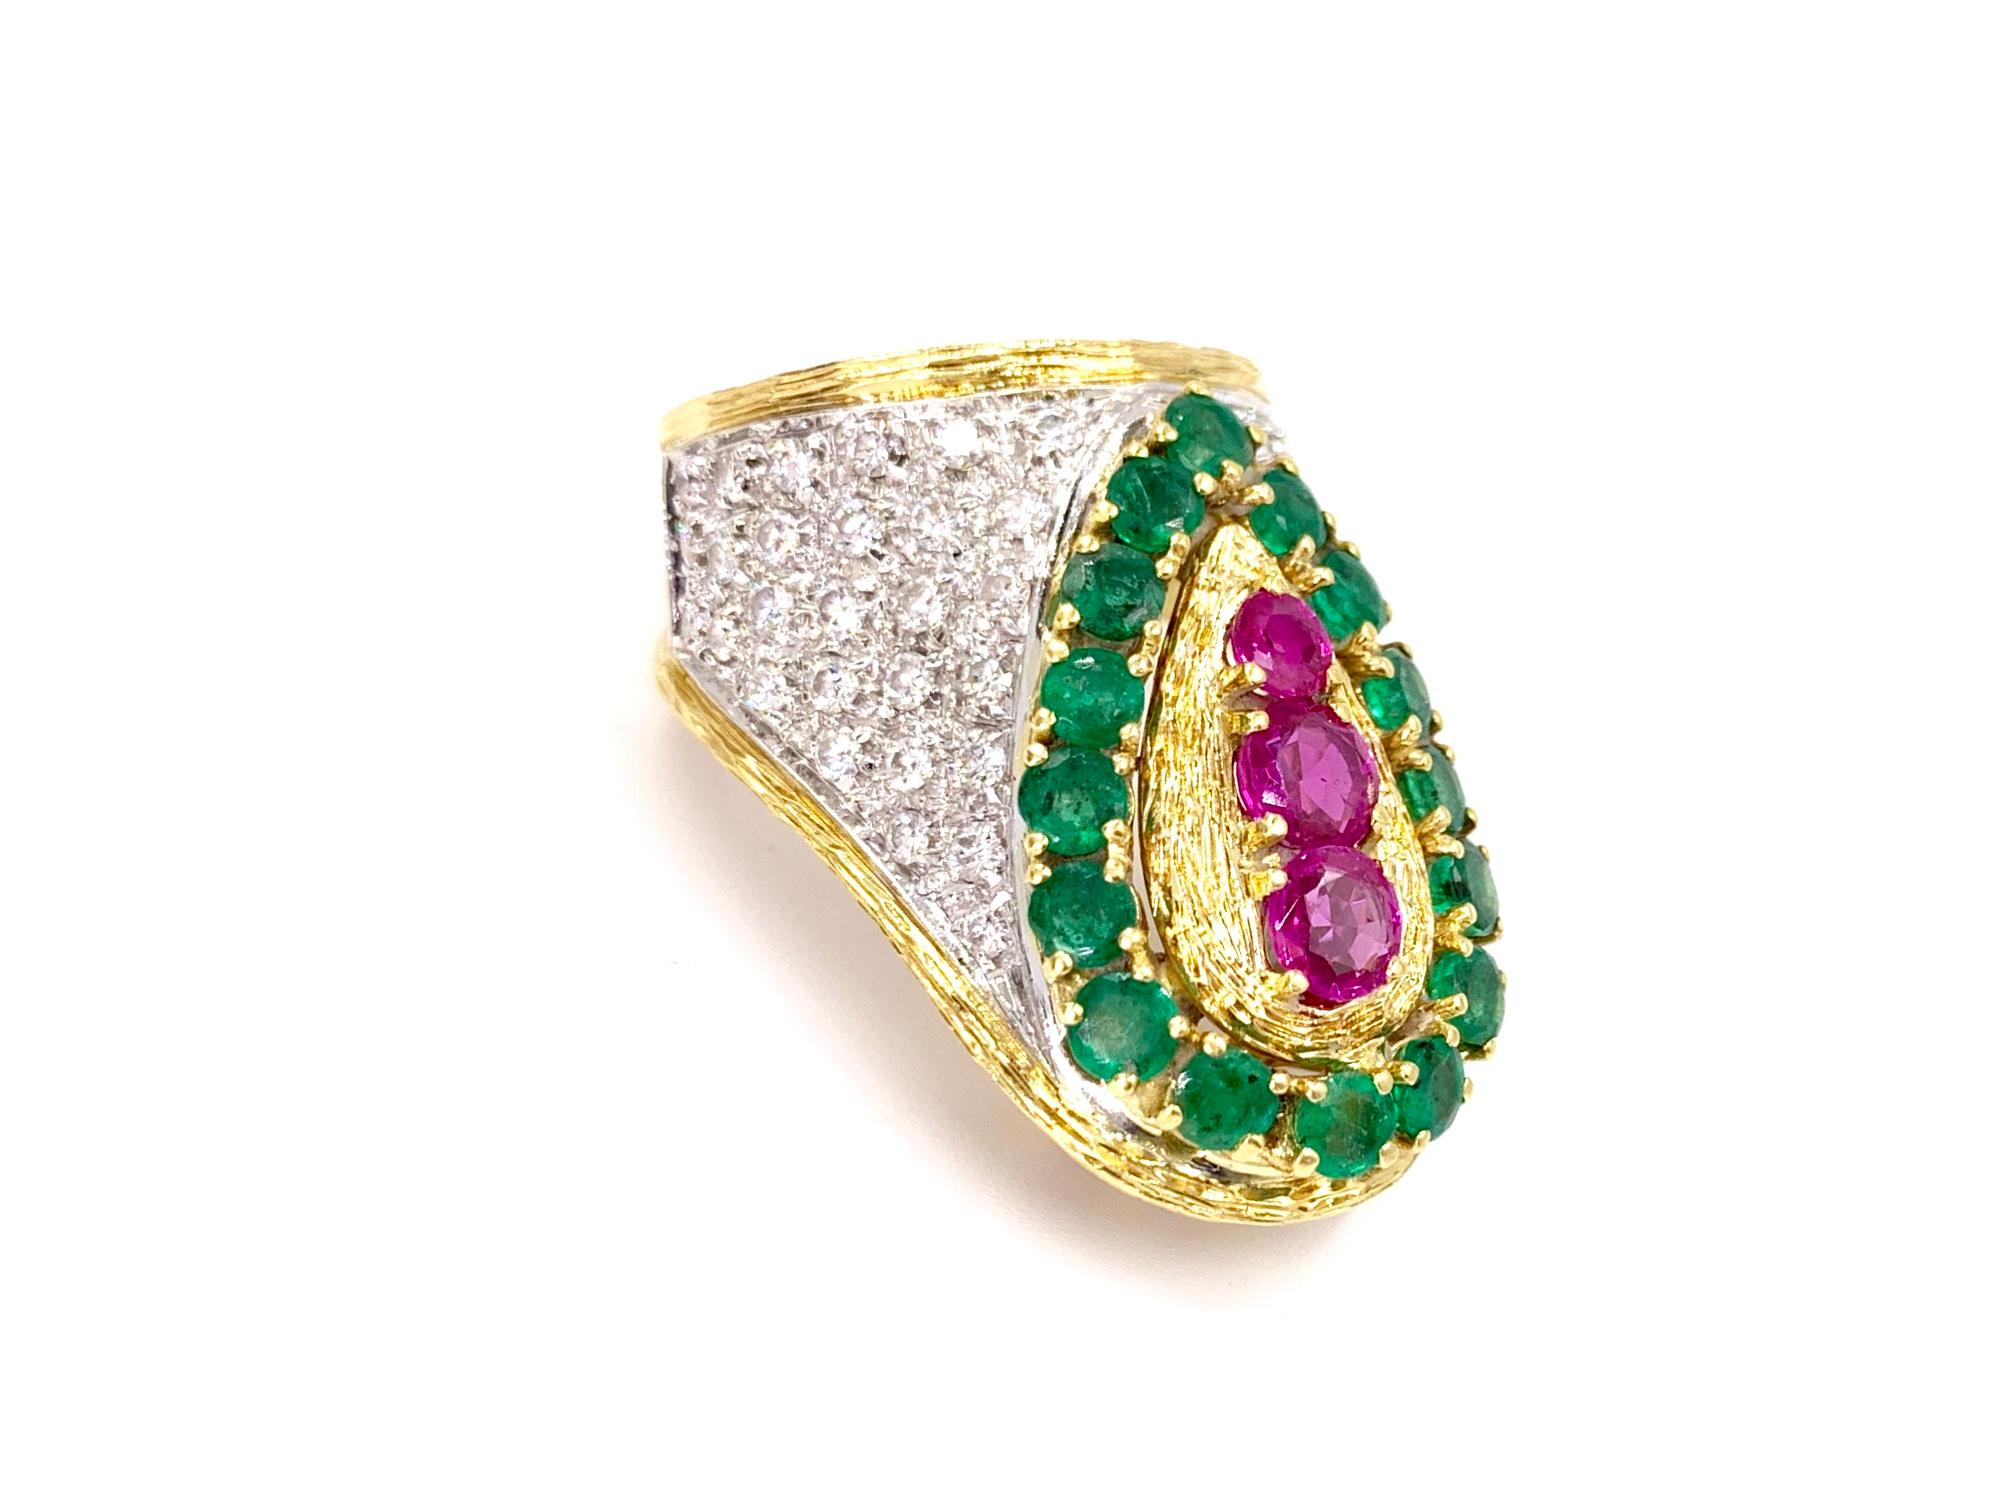 A truly unique find. This large 18 karat two tone gold diamond, emerald and ruby ring has an eye-catching curvy shape and design, made to rest upon the knuckle. Ring features three vibrant rubies at approximately 1.75 carats total weight. Sixteen